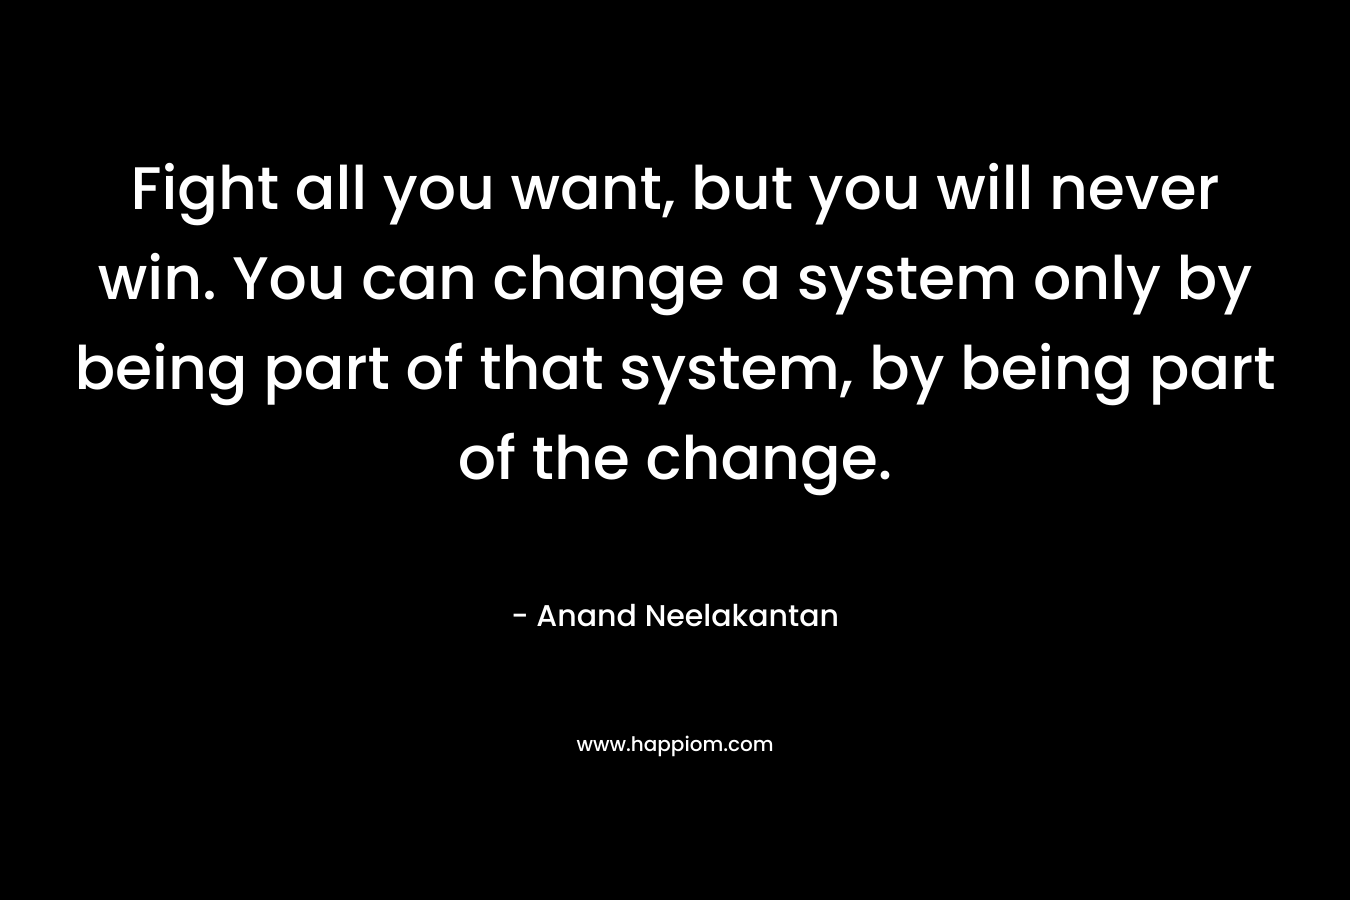 Fight all you want, but you will never win. You can change a system only by being part of that system, by being part of the change. – Anand Neelakantan